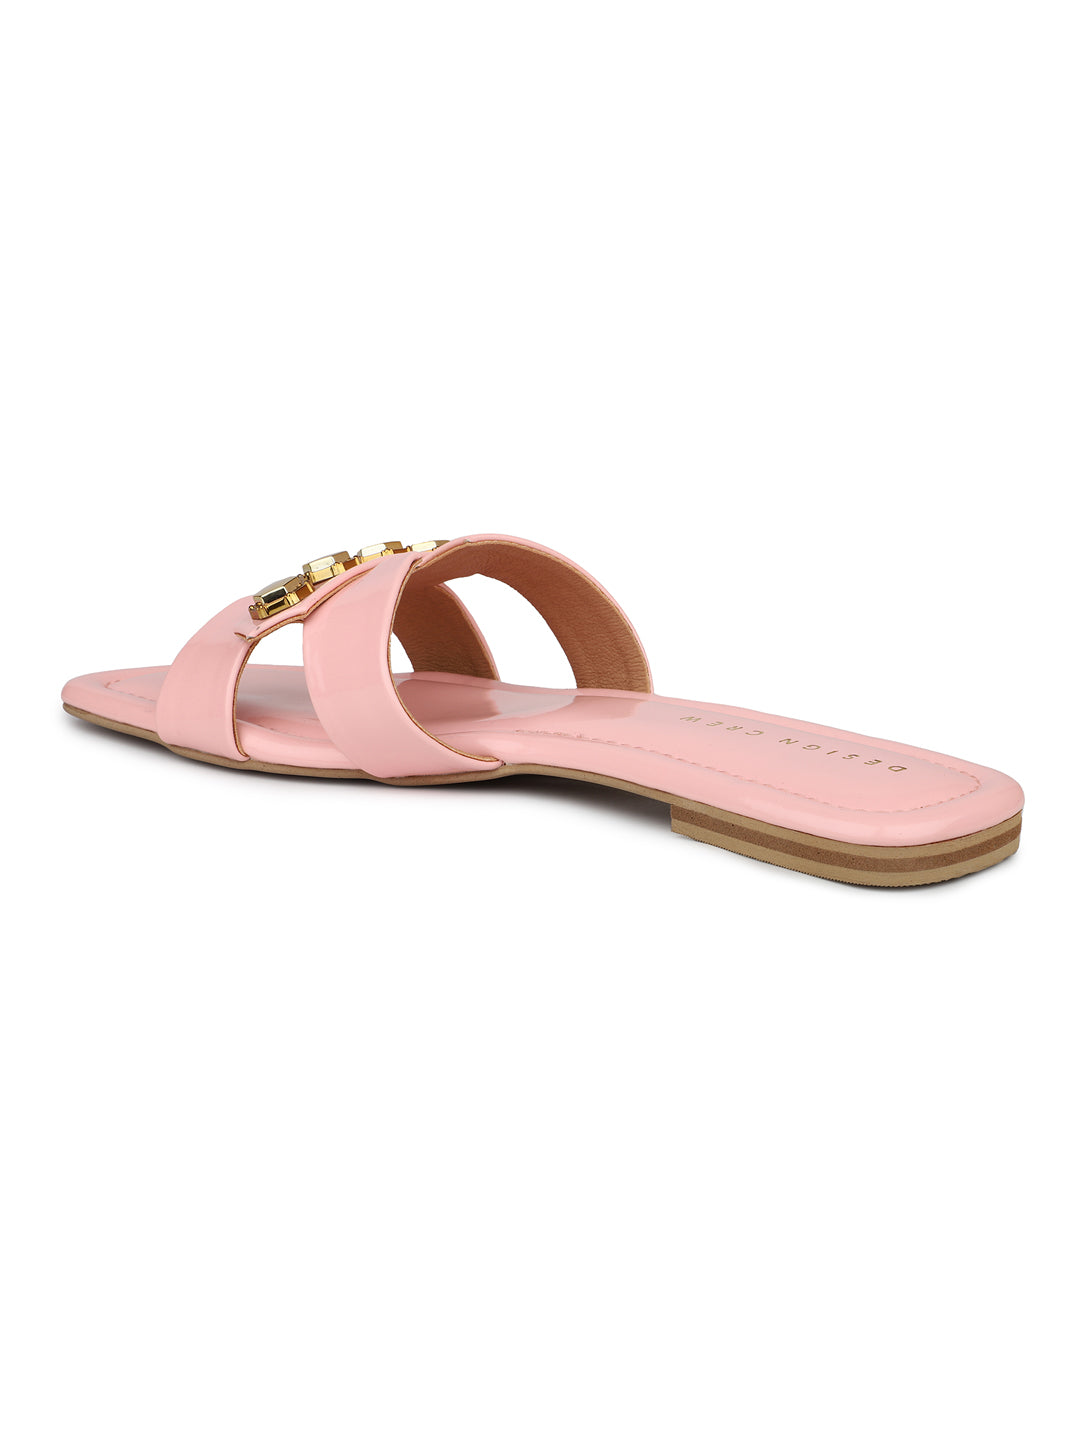 Classic H Syle Slide Sandal With Metal Trims